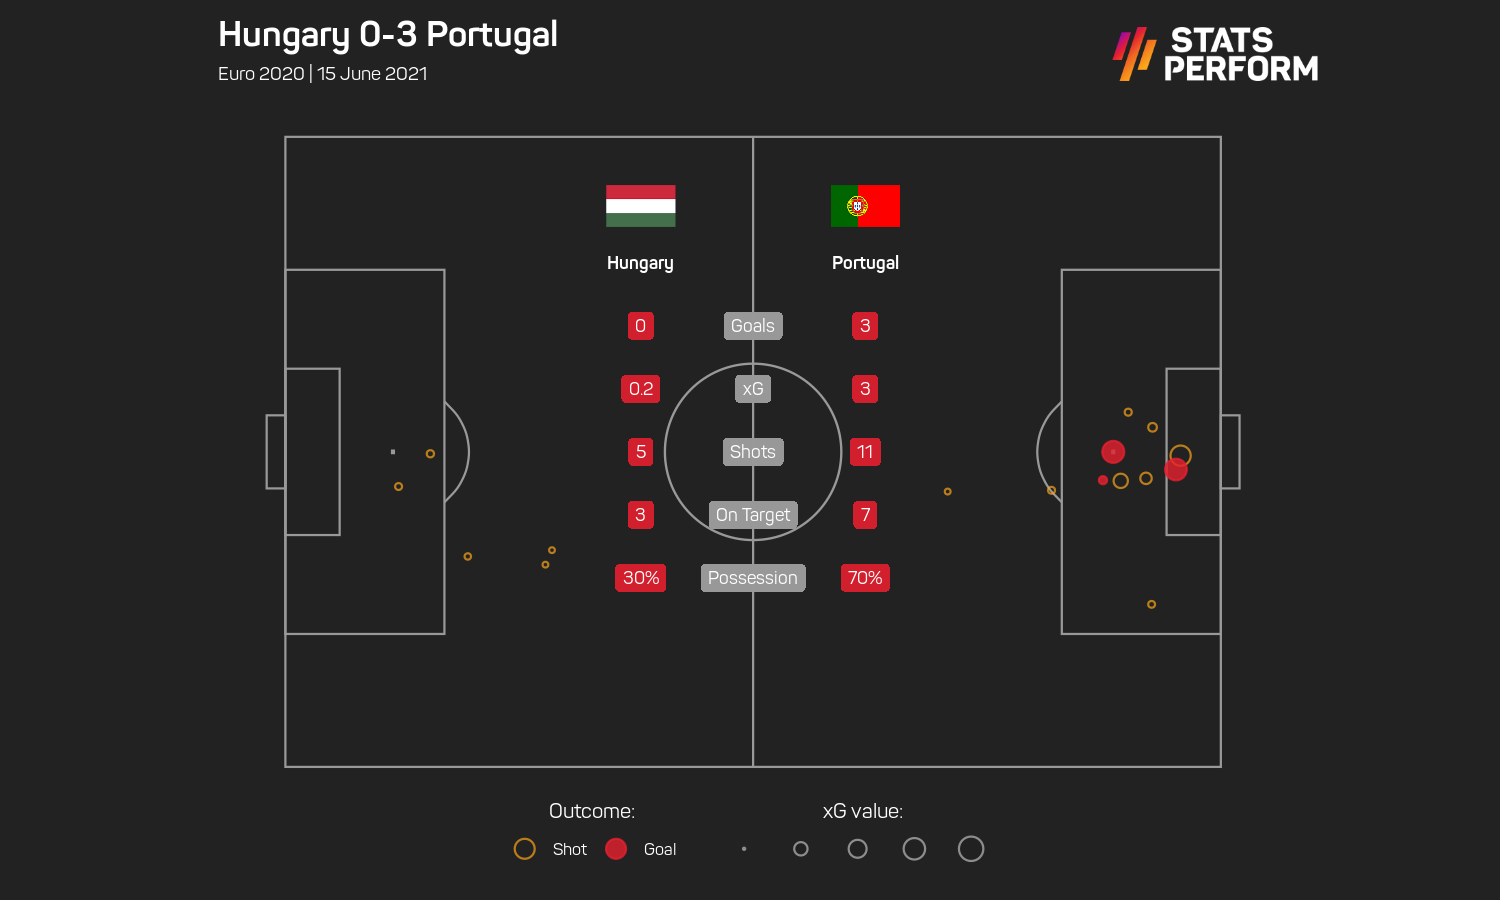 Portugal were ultimately good value for the win